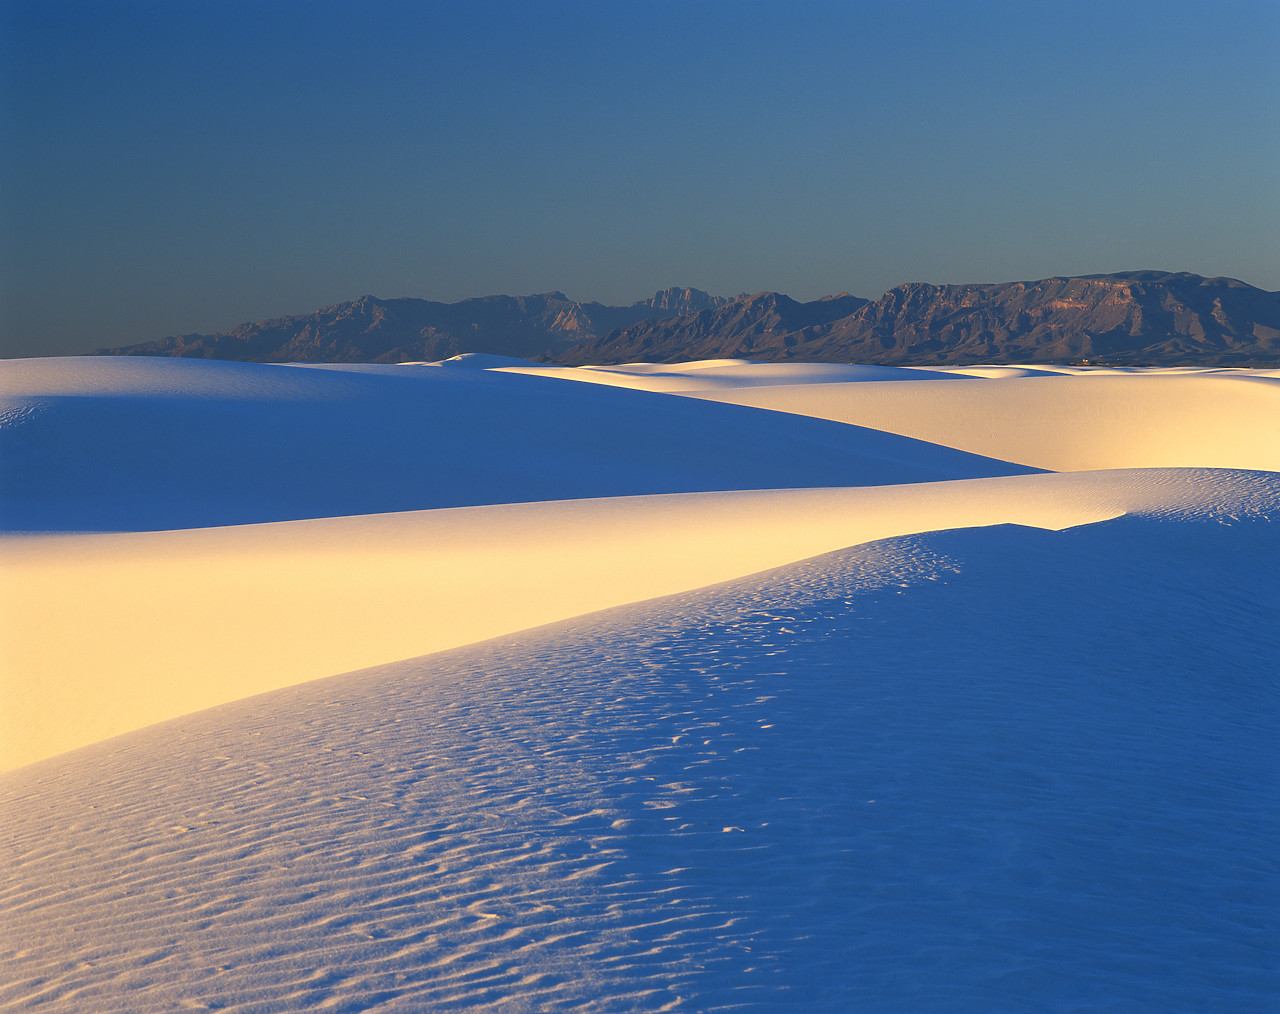 #990657-2 - Sand Dunes, White Sands National Monument, New Mexico, USA